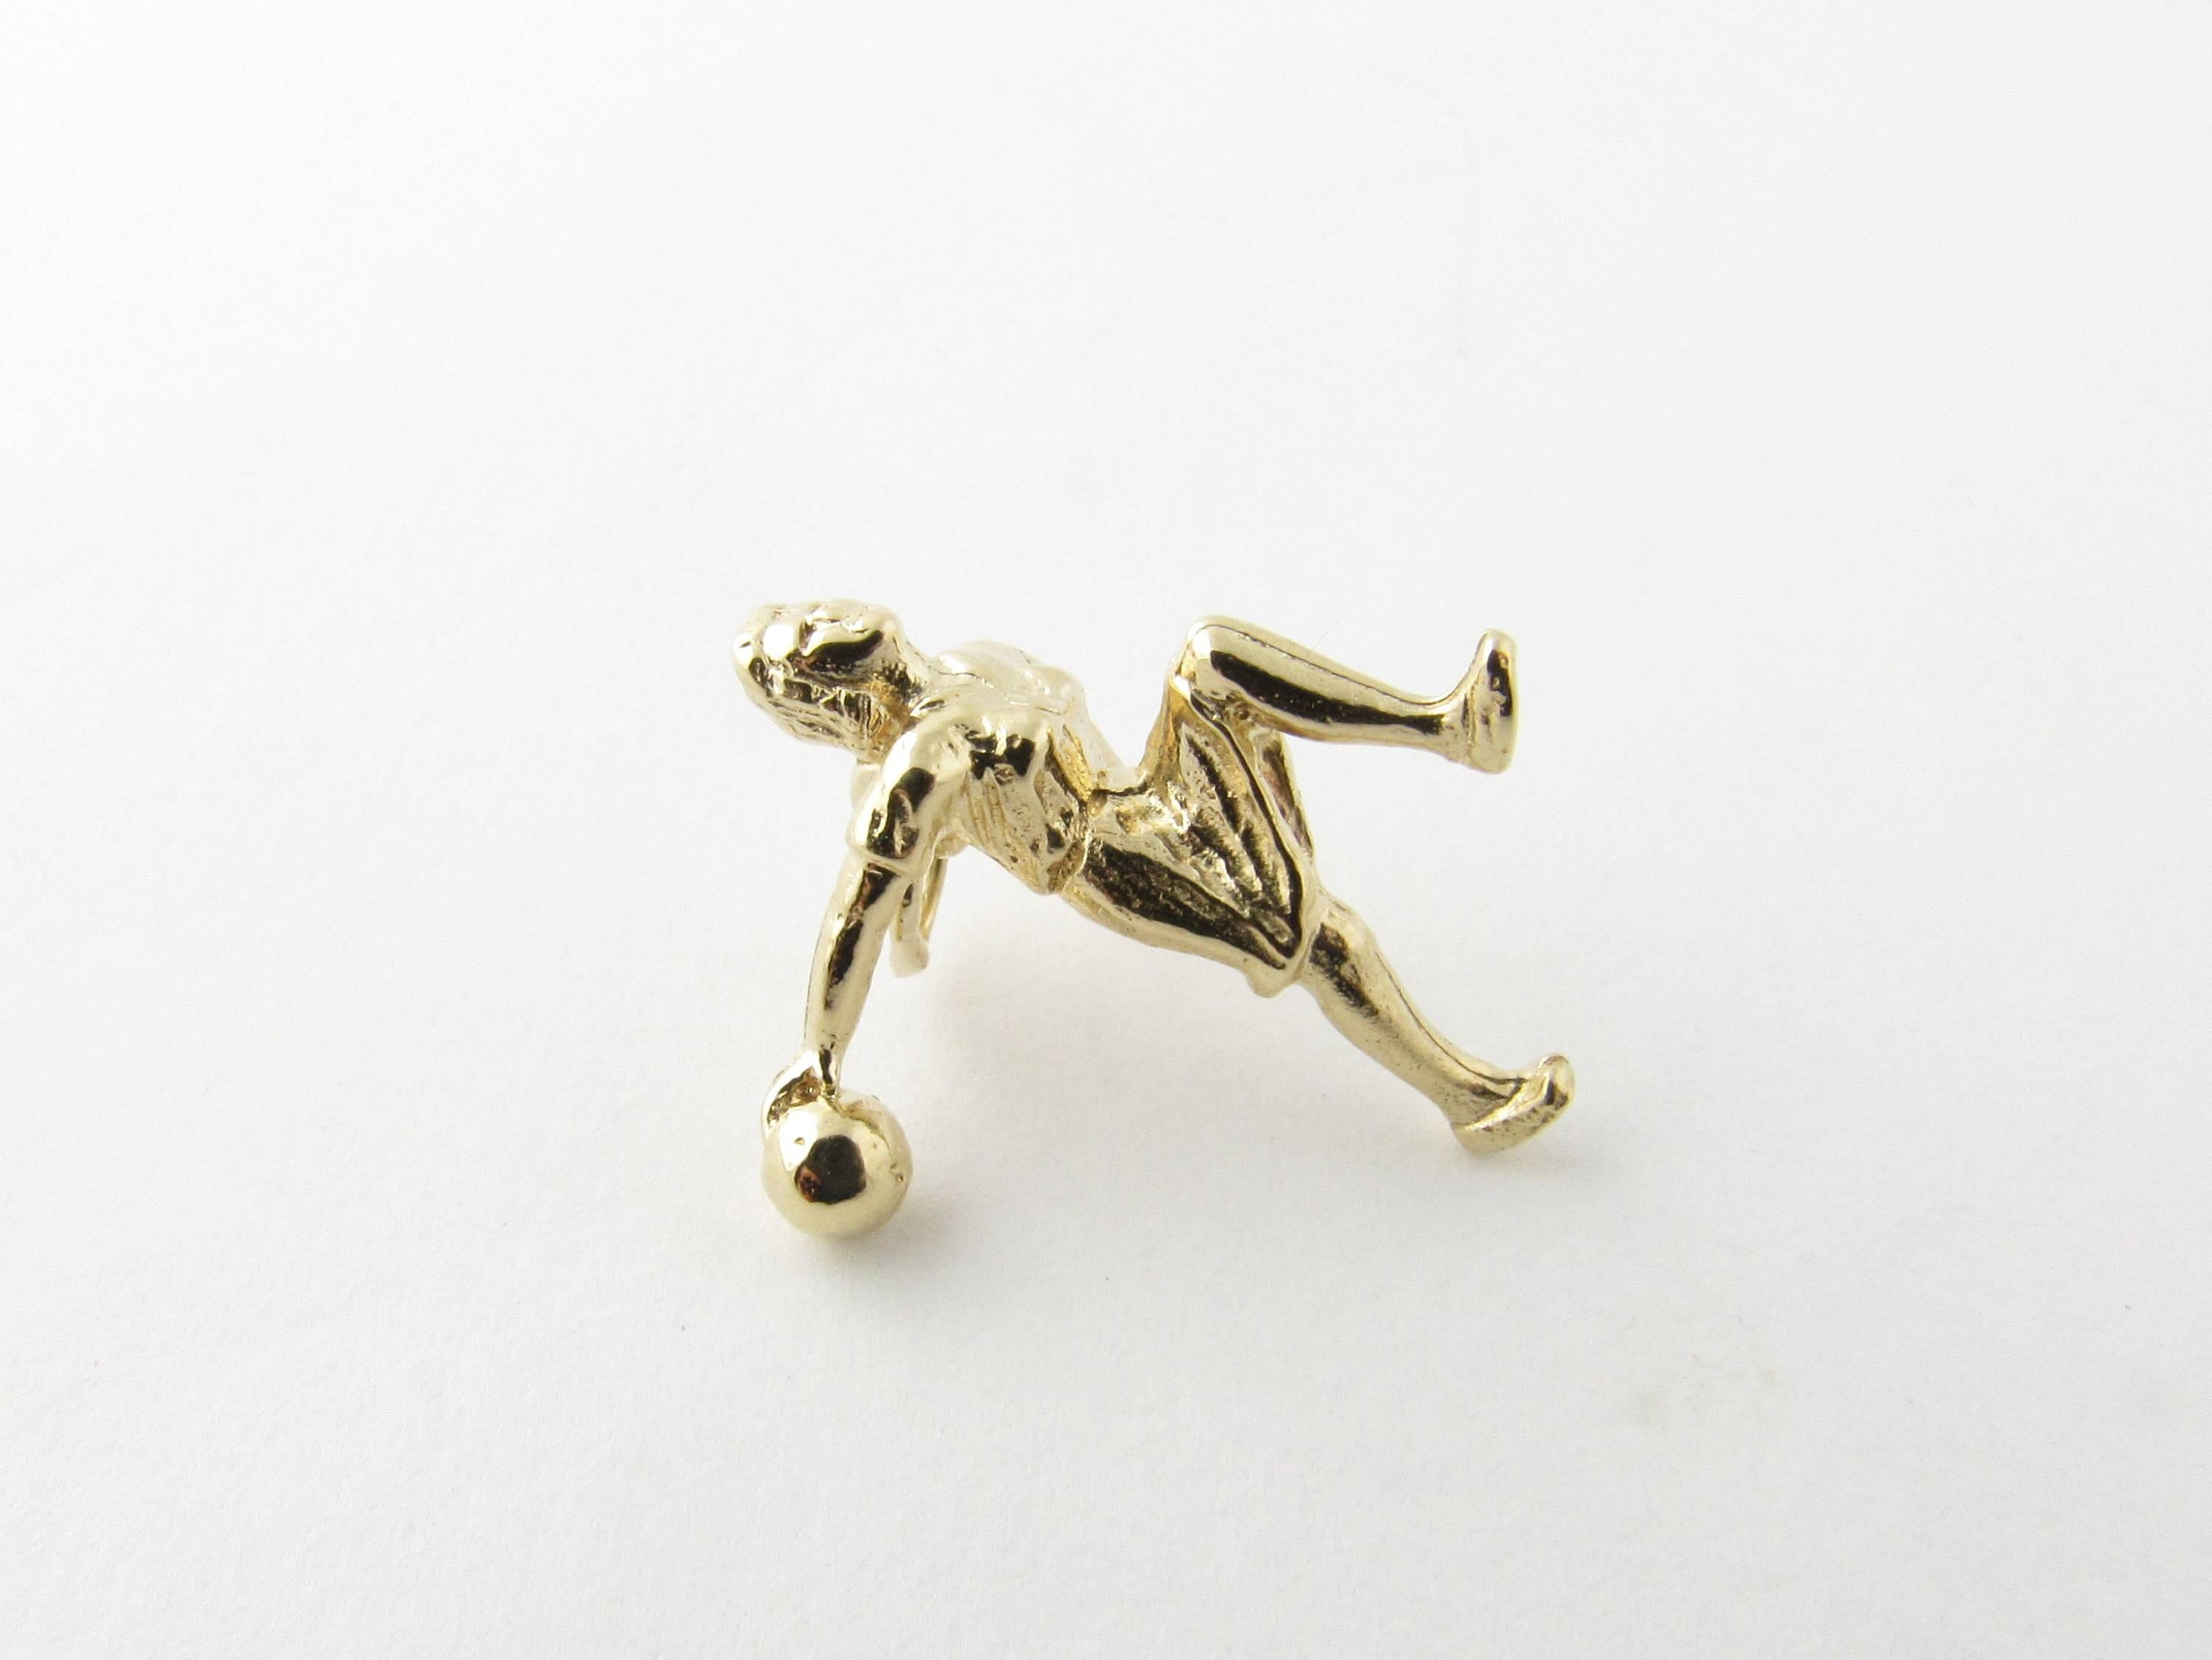 Vintage 14 Karat Yellow Gold Bowler Charm- 
Strike! 
This 3D charm depicts a bowler in action. Meticulously detailed in 14K yellow gold. 
Size: 21 mm x 13 mm (actual charm) 
Weight: 2.1 dwt. / 3.3 gr. 
Hallmark: Tested for 14K gold. 
Very good